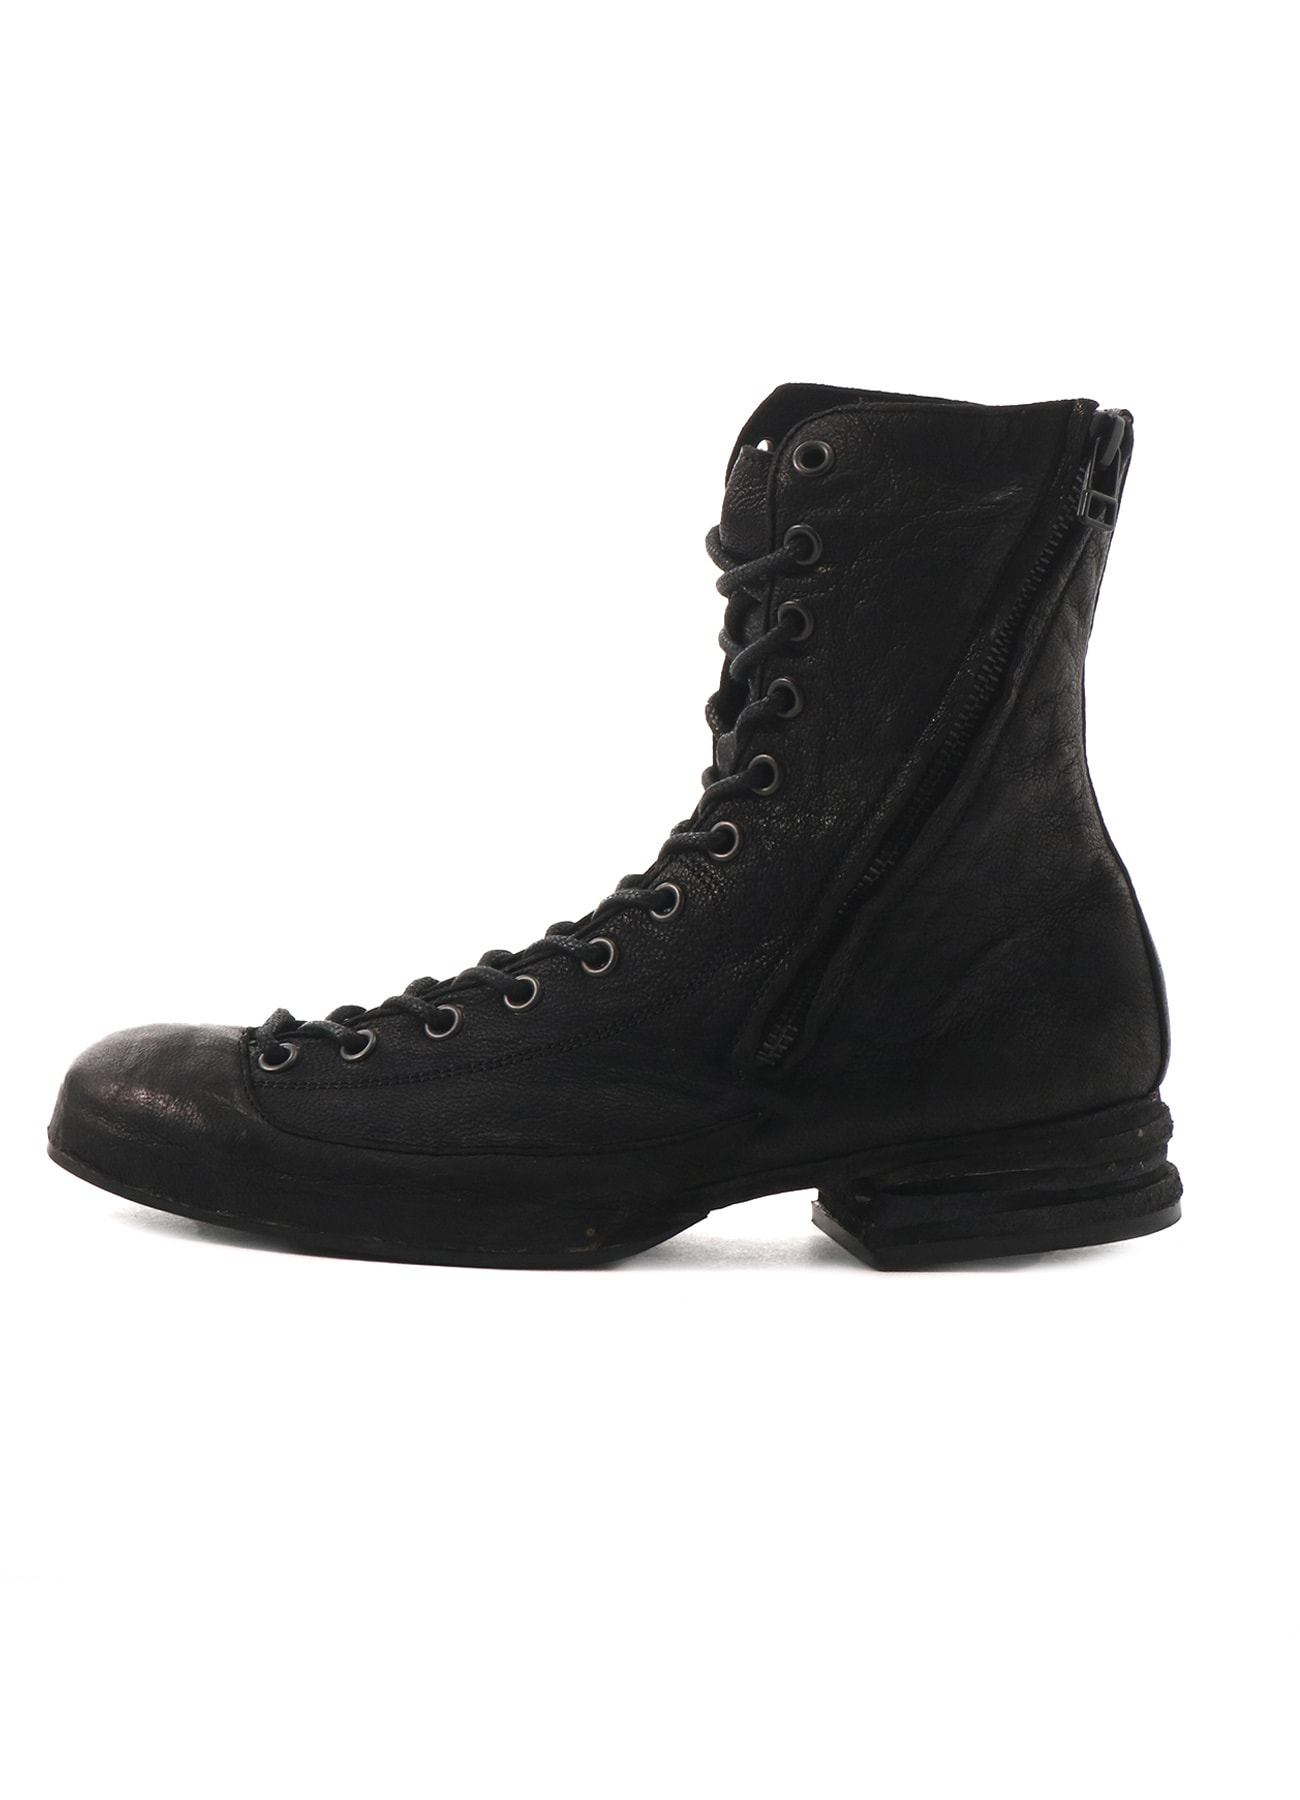 PIECE DYE GOAT LACE UP FASTENER BOOTS